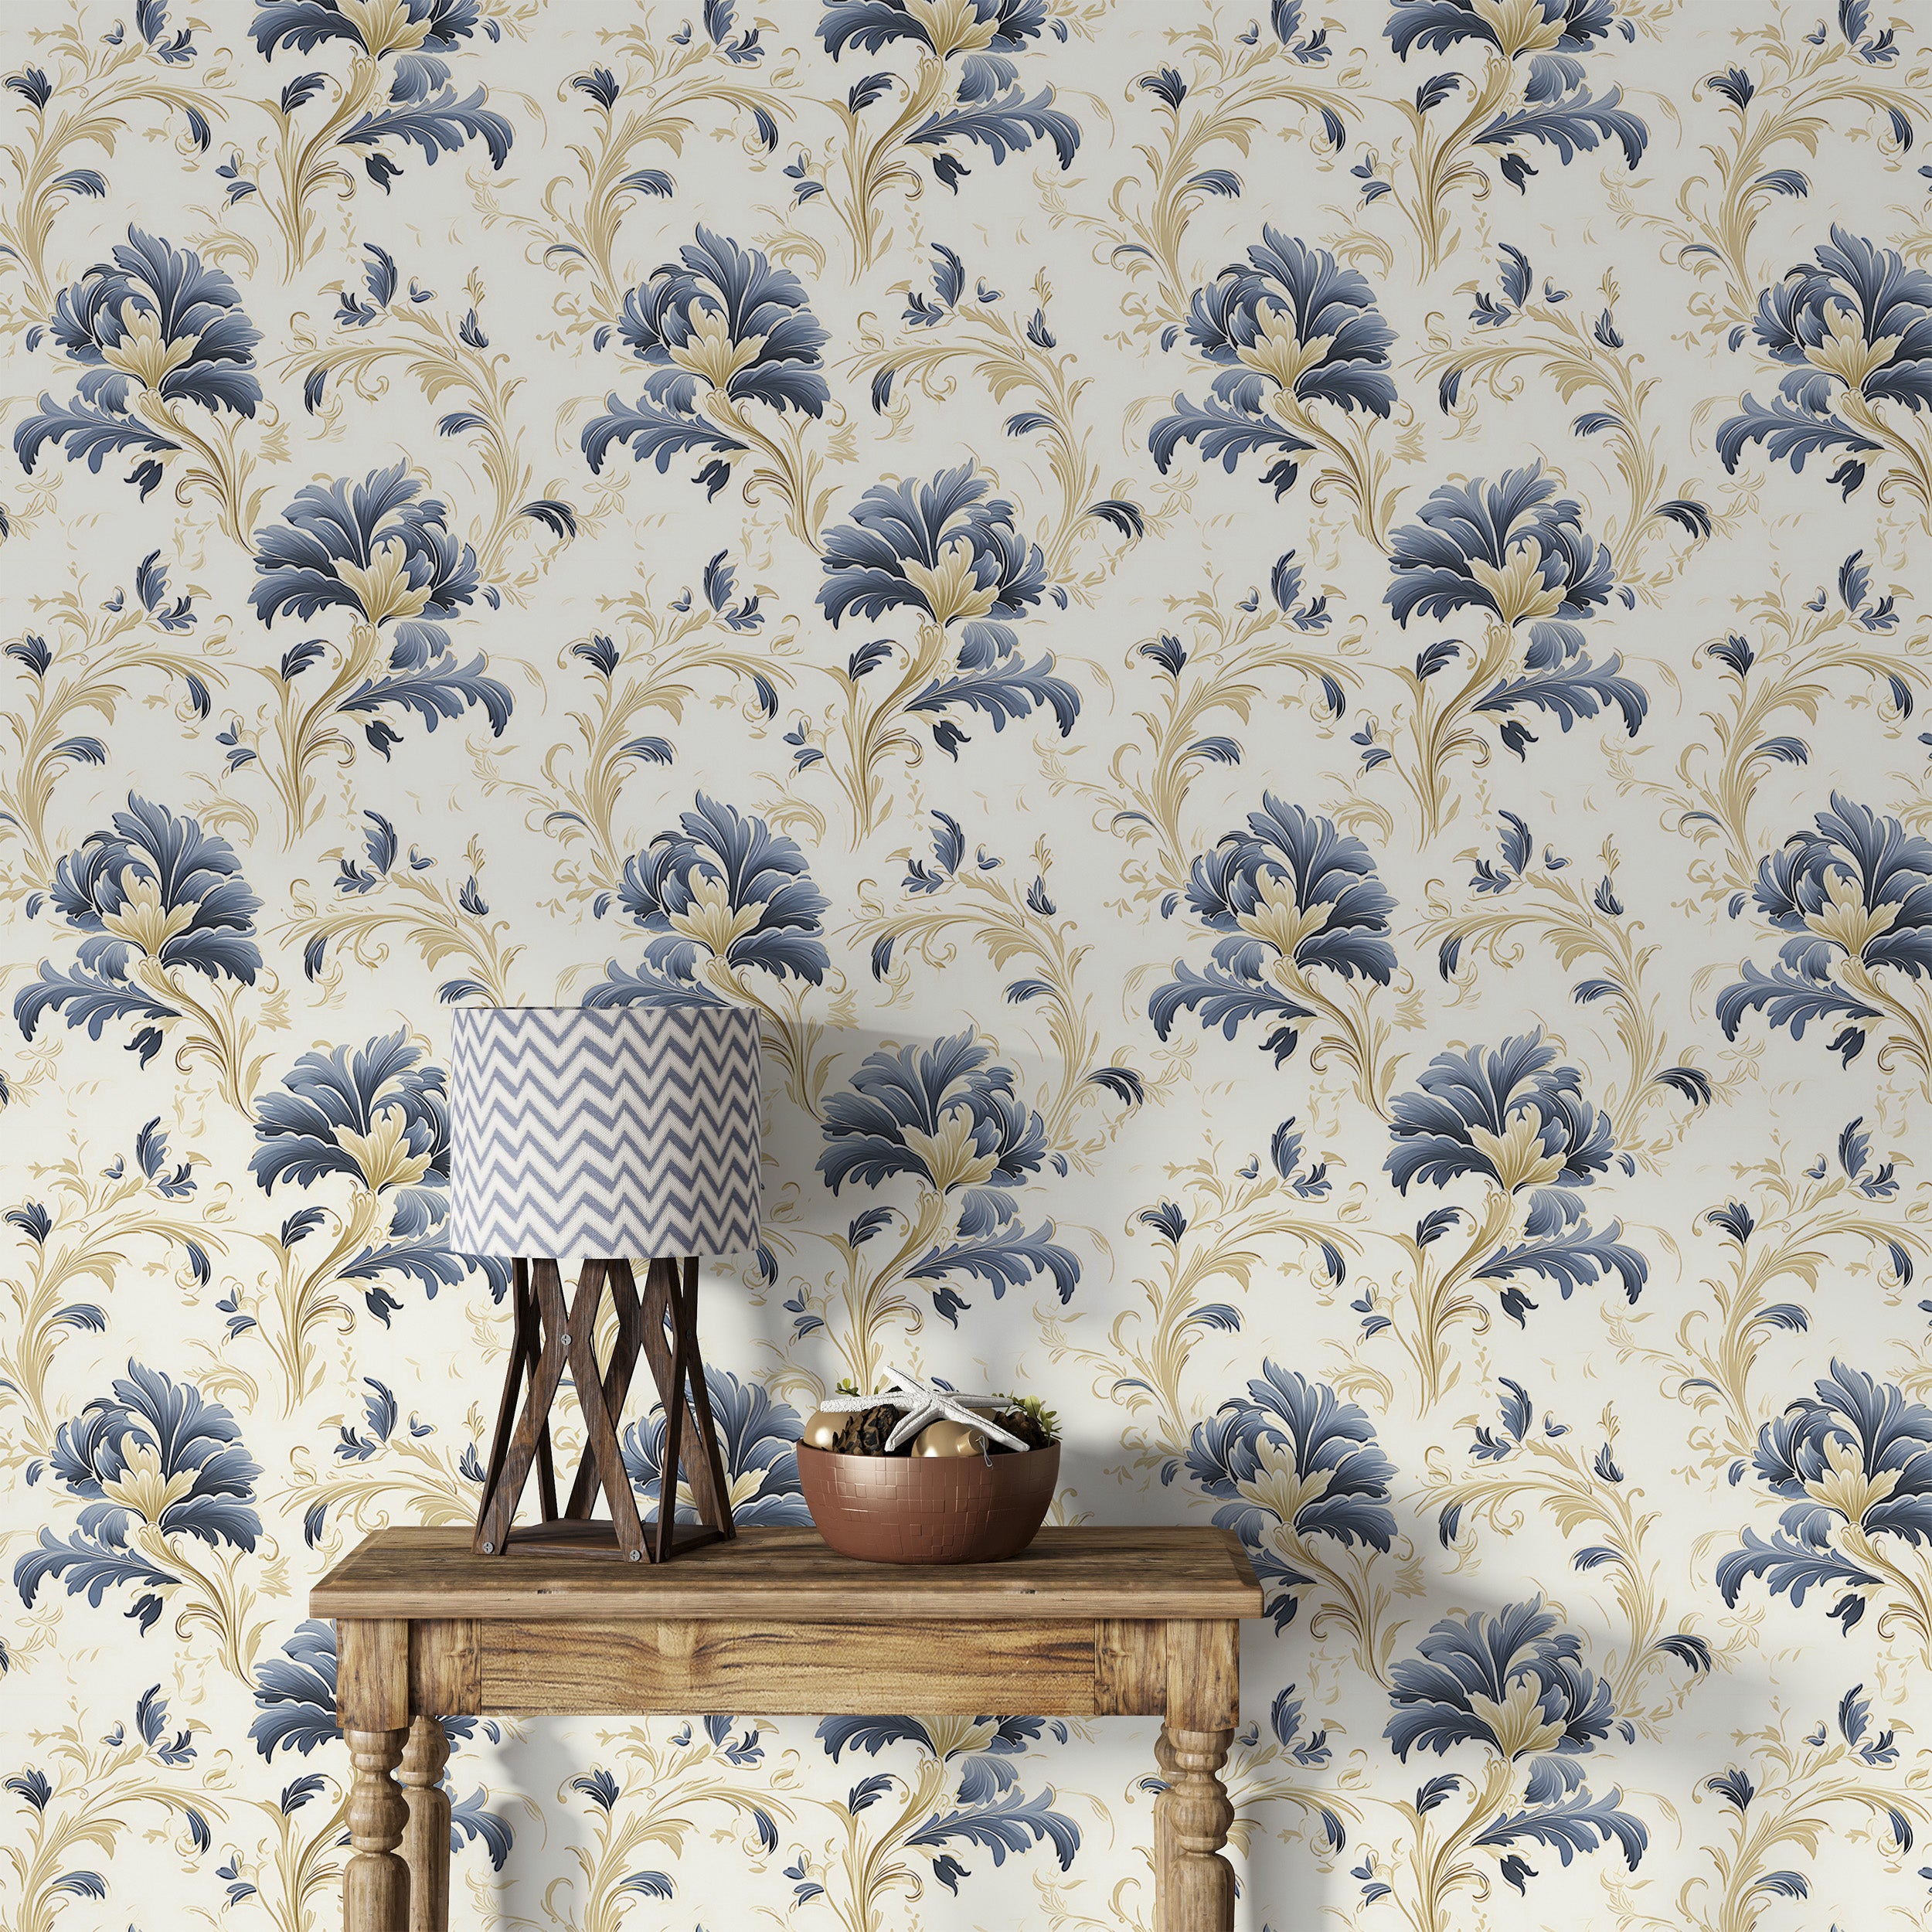 Beige Floral Peel and Stick Wallpaper in Room Setting